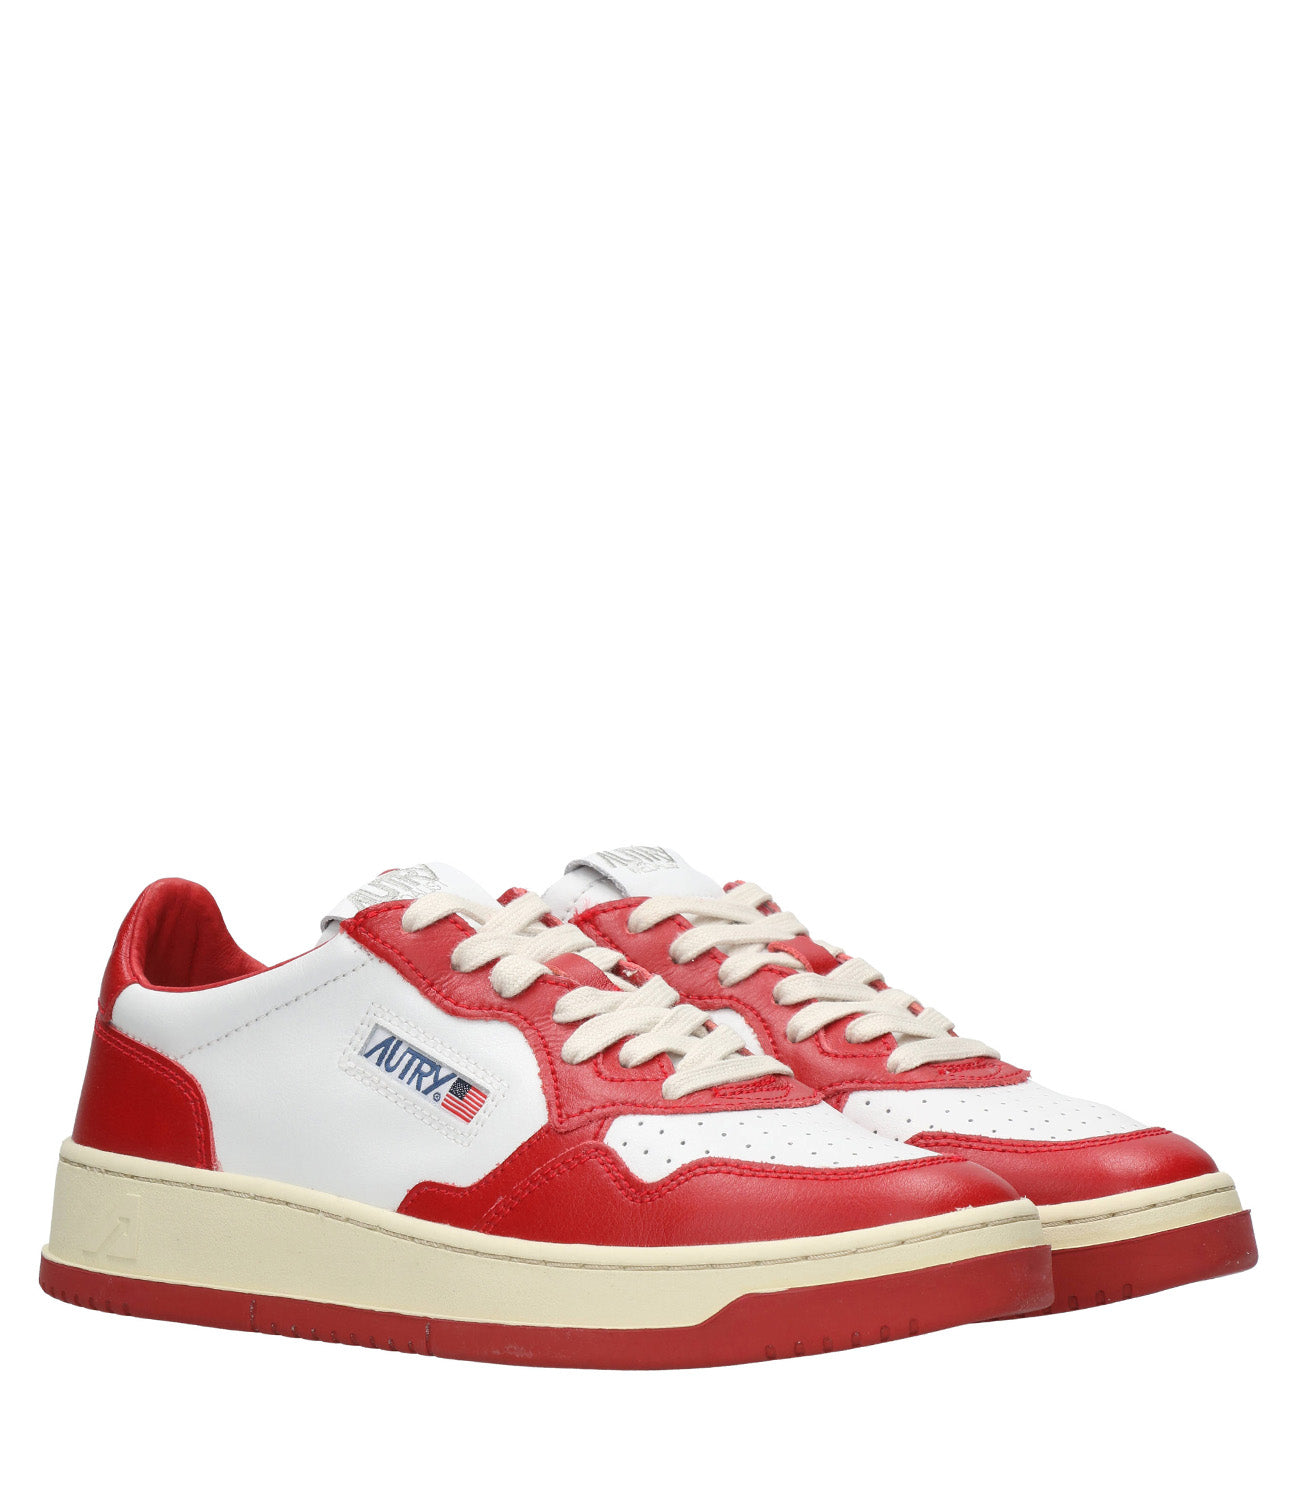 Autry | Sneakers Medalist Low Bianco e Rosso